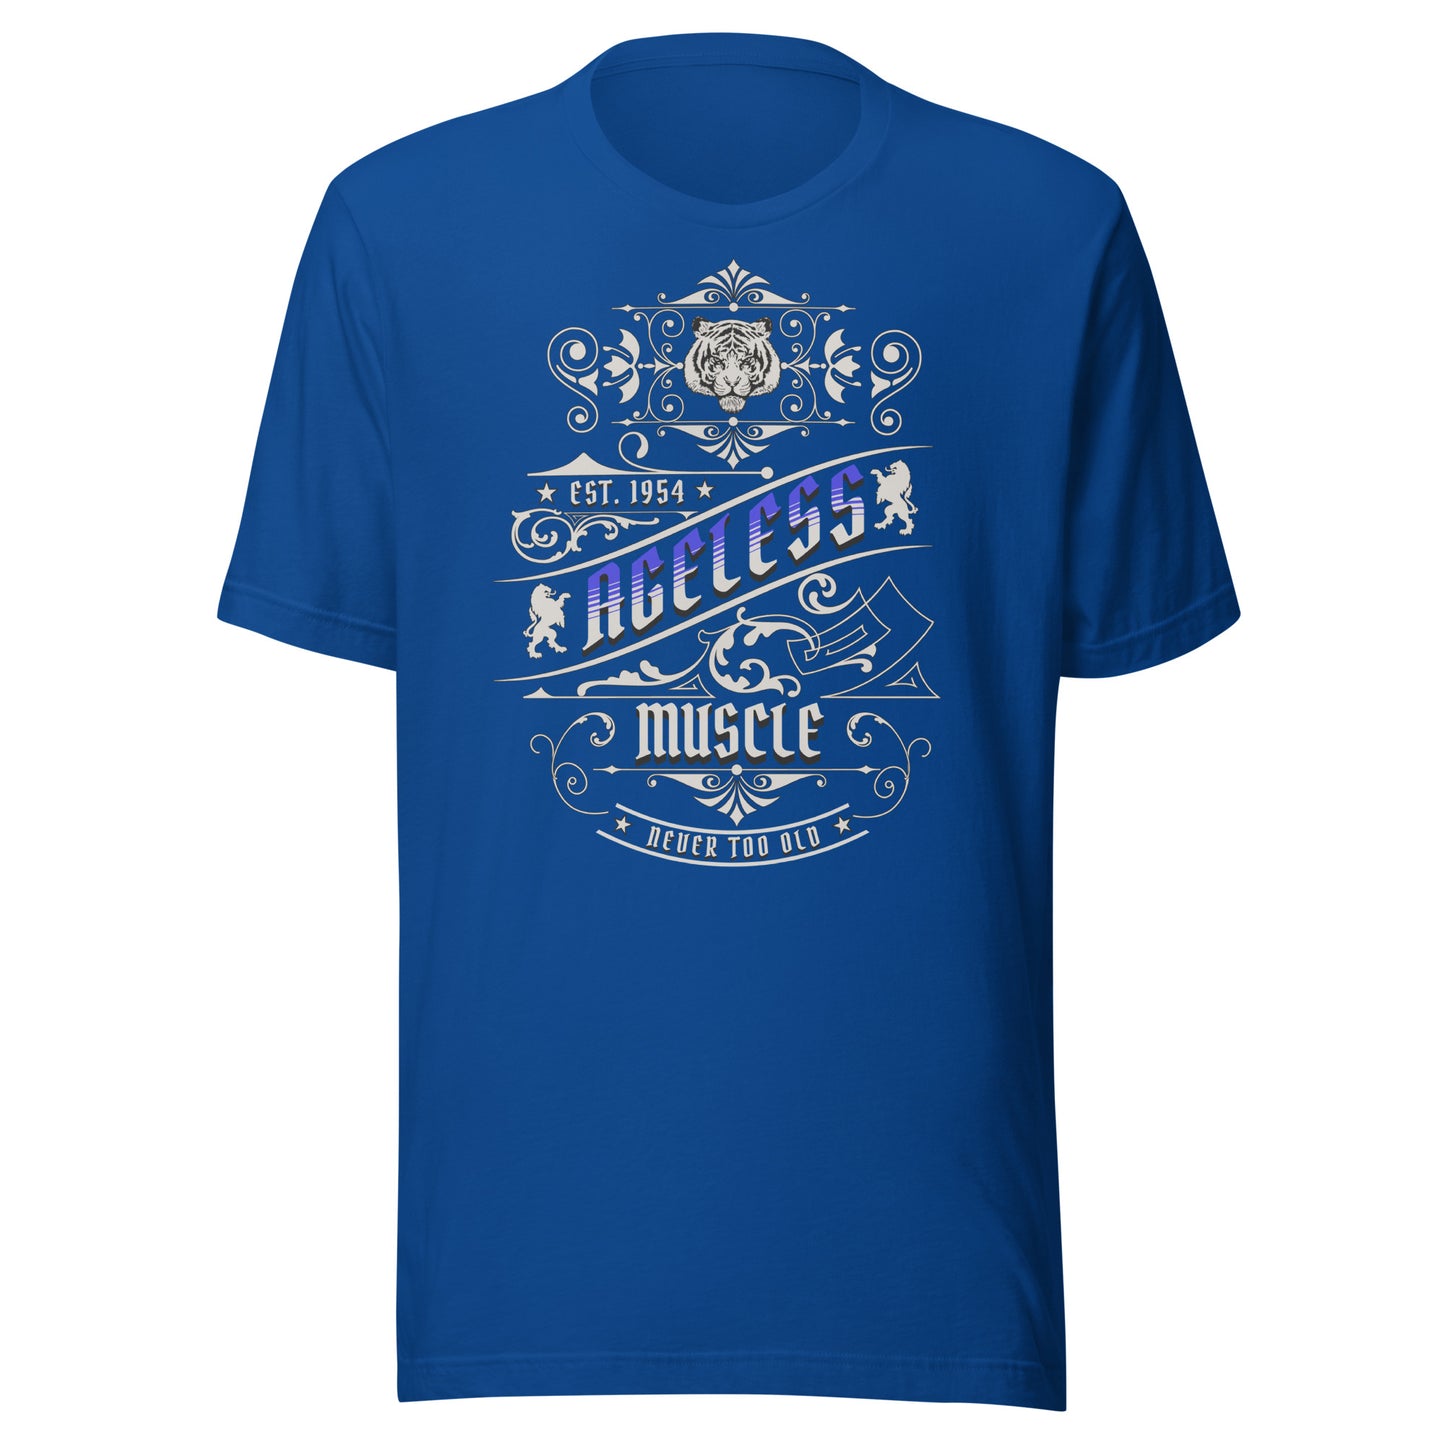 Ageless Muscle: Never Too Old Unisex T-shirt